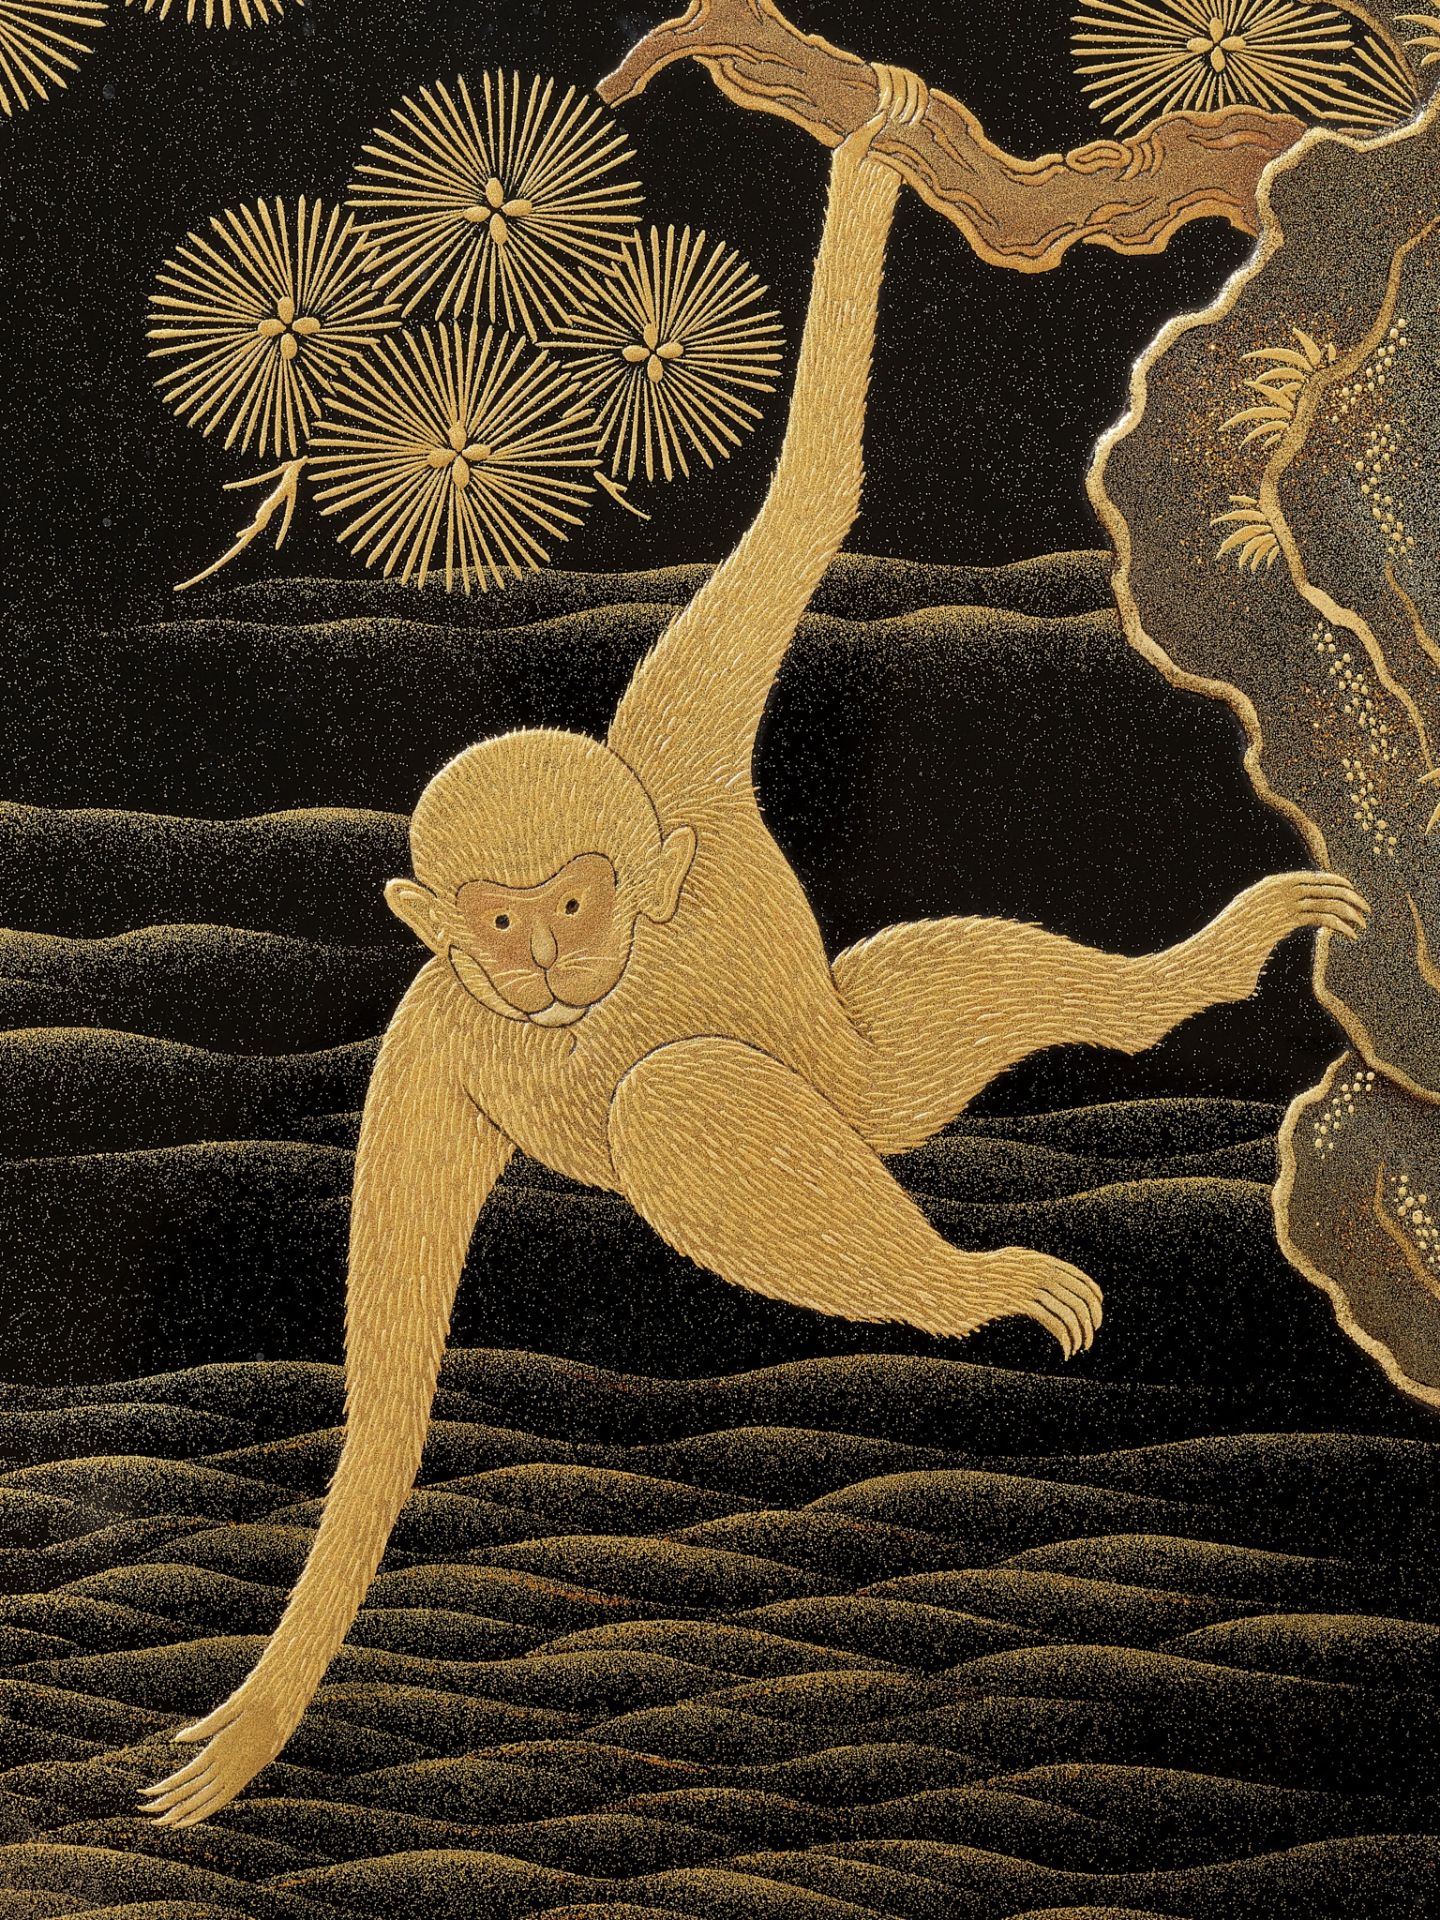 SUZUKI KONYU II: A LACQUER SUZURIBAKO DEPICTING A GIBBON REACHING FOR THE REFLECTION OF THE MOON - Image 2 of 13